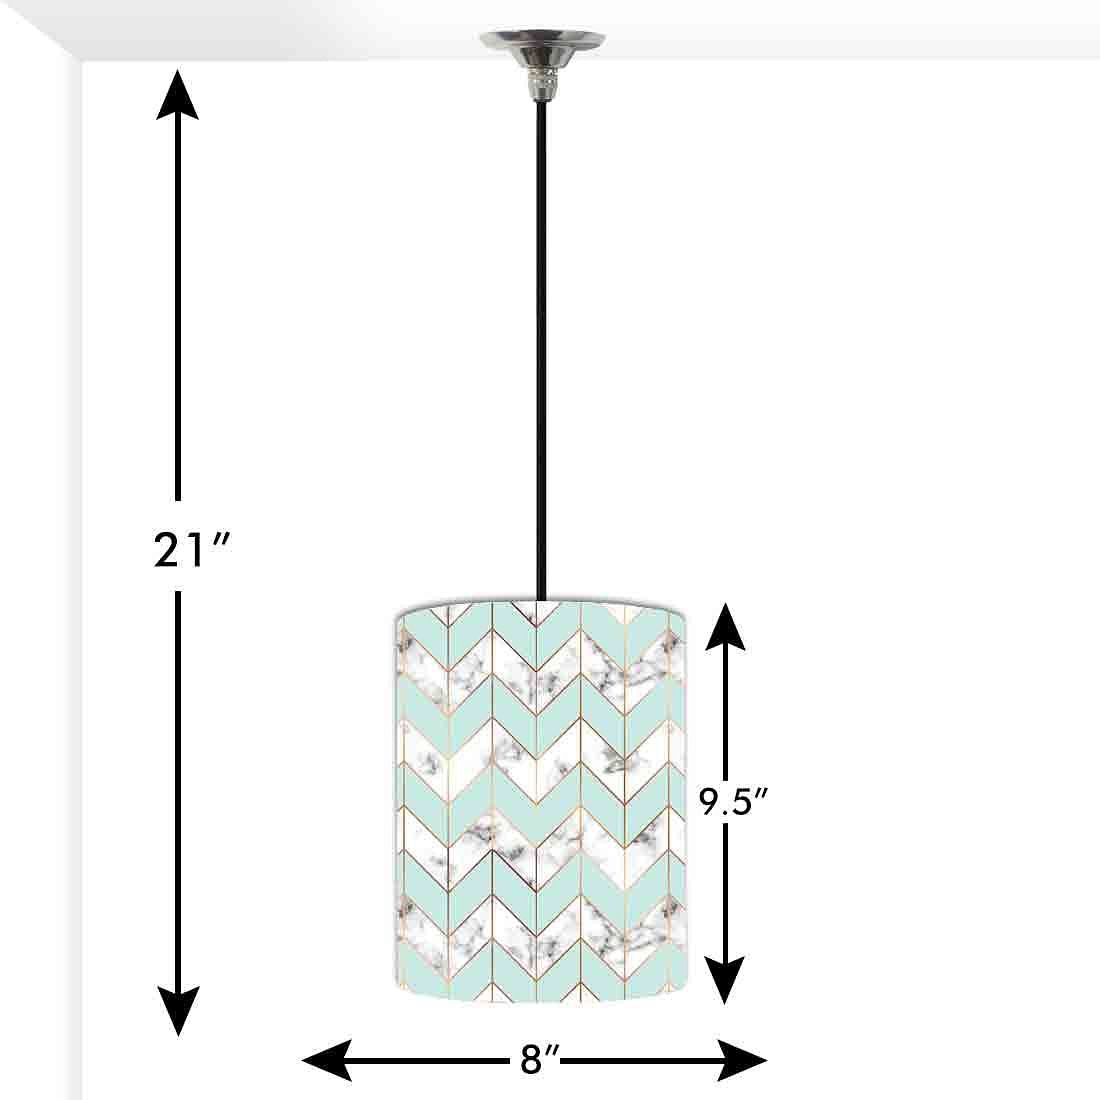 Ceiling Hanging Pendant Lamp Shade - White Green Marble Pastle Nutcase